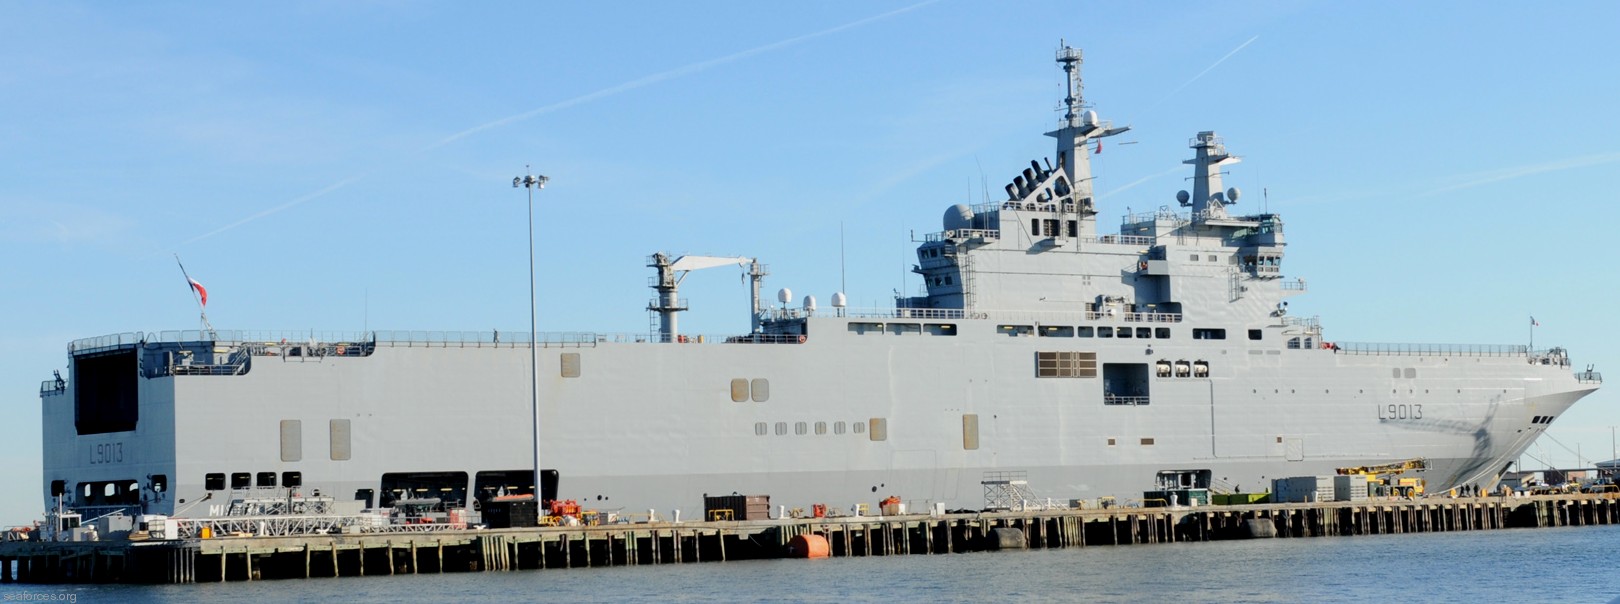 l-9013 fs mistral amphibious assault command ship french navy marine nationale 29